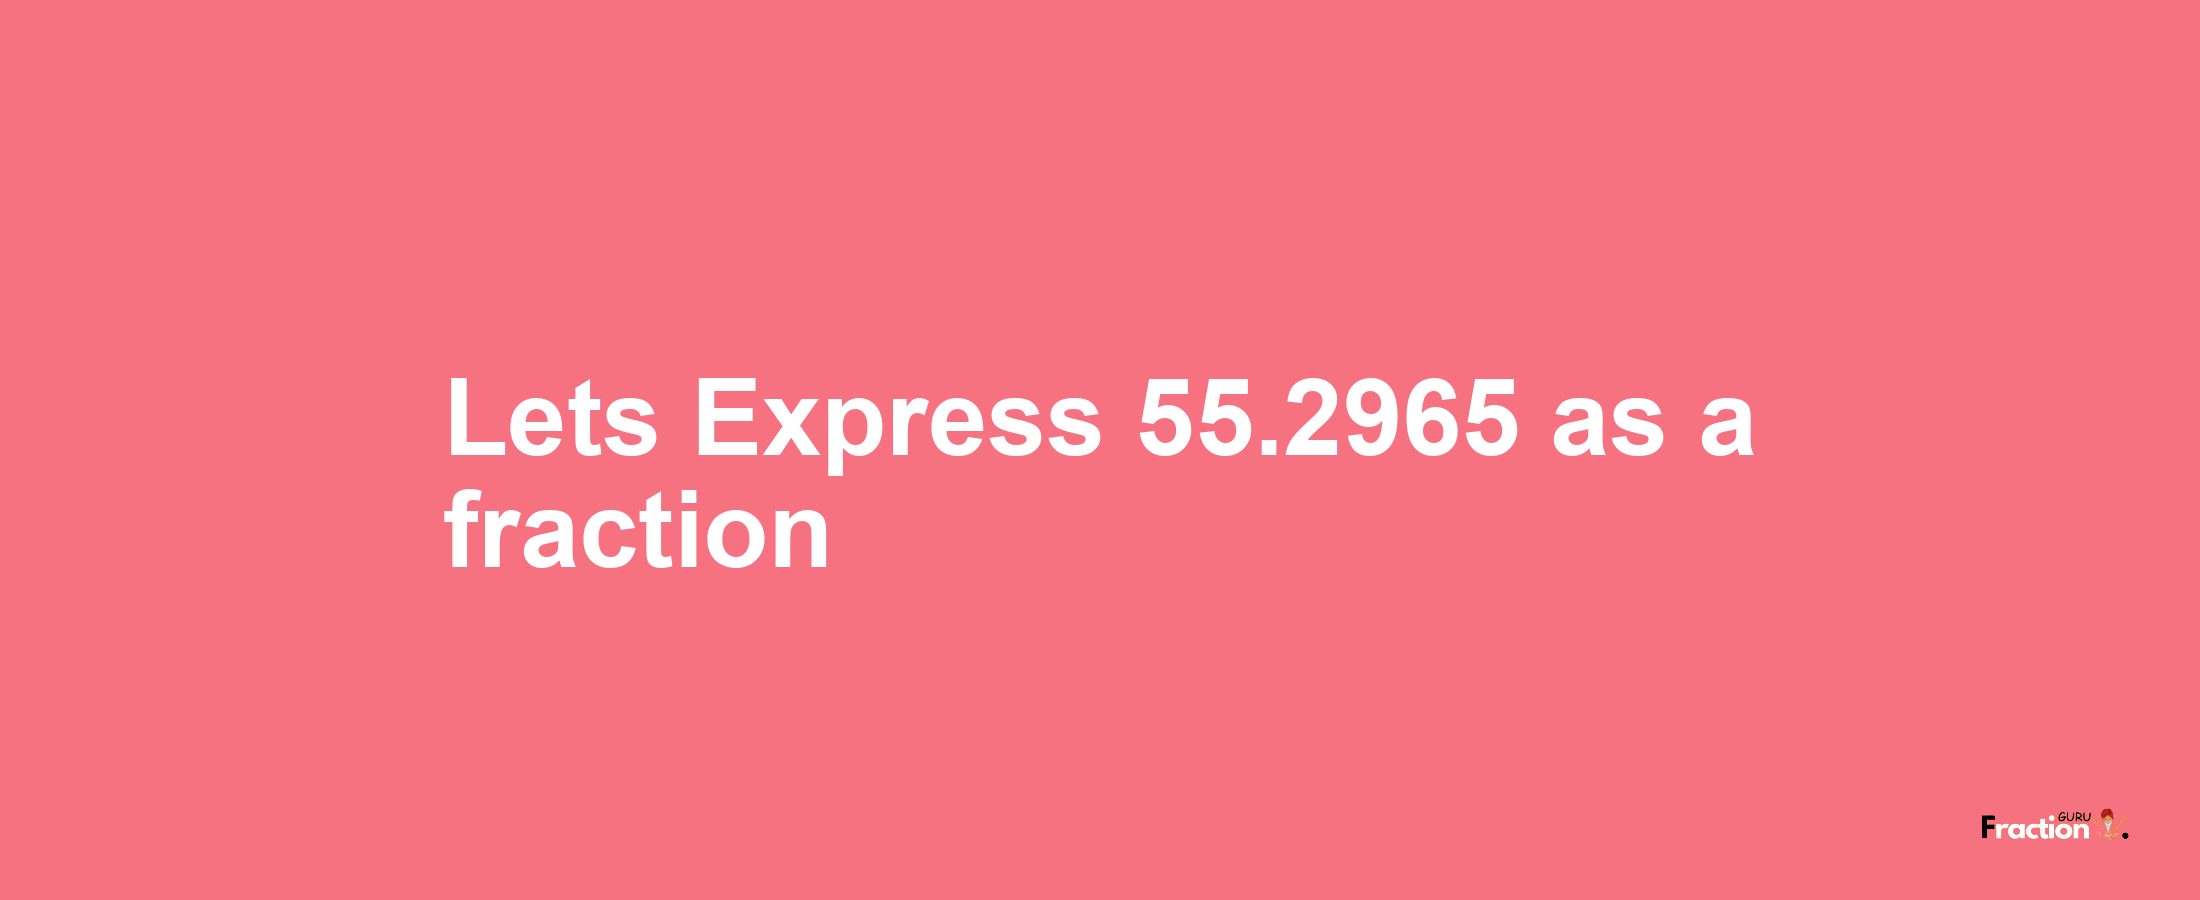 Lets Express 55.2965 as afraction